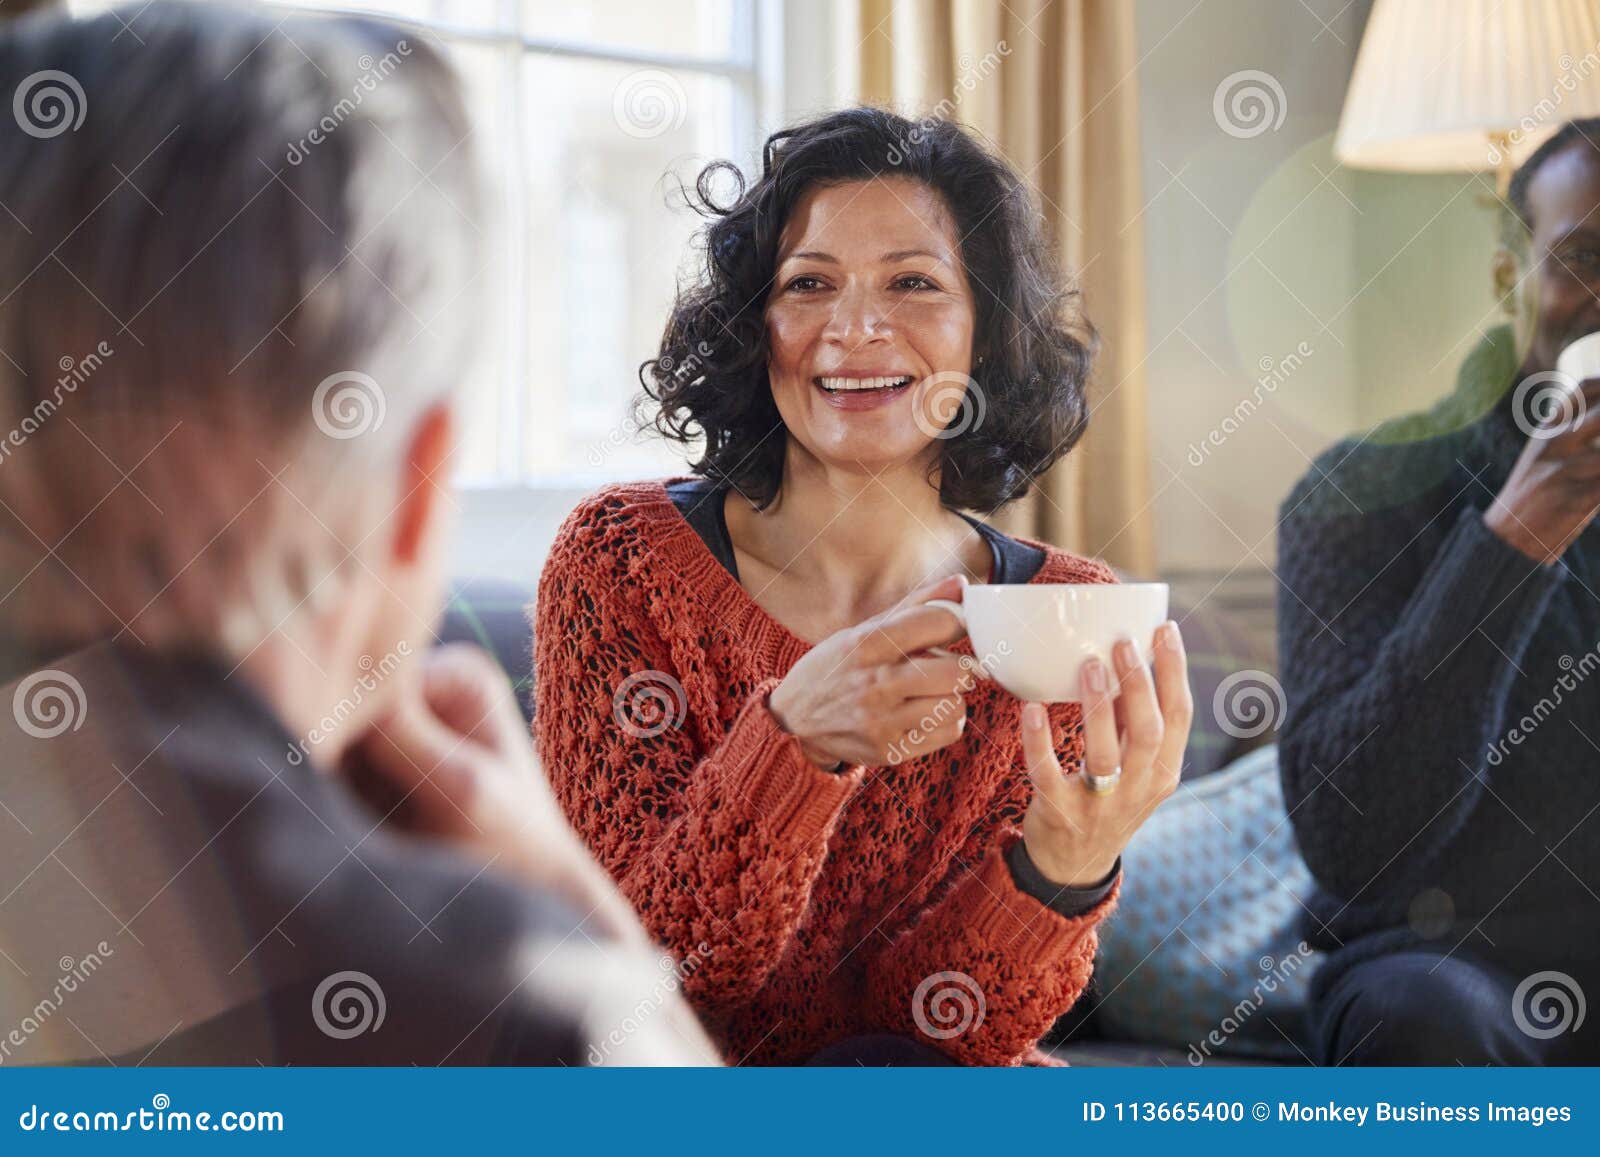 middle aged woman meeting friends around table in coffee shop